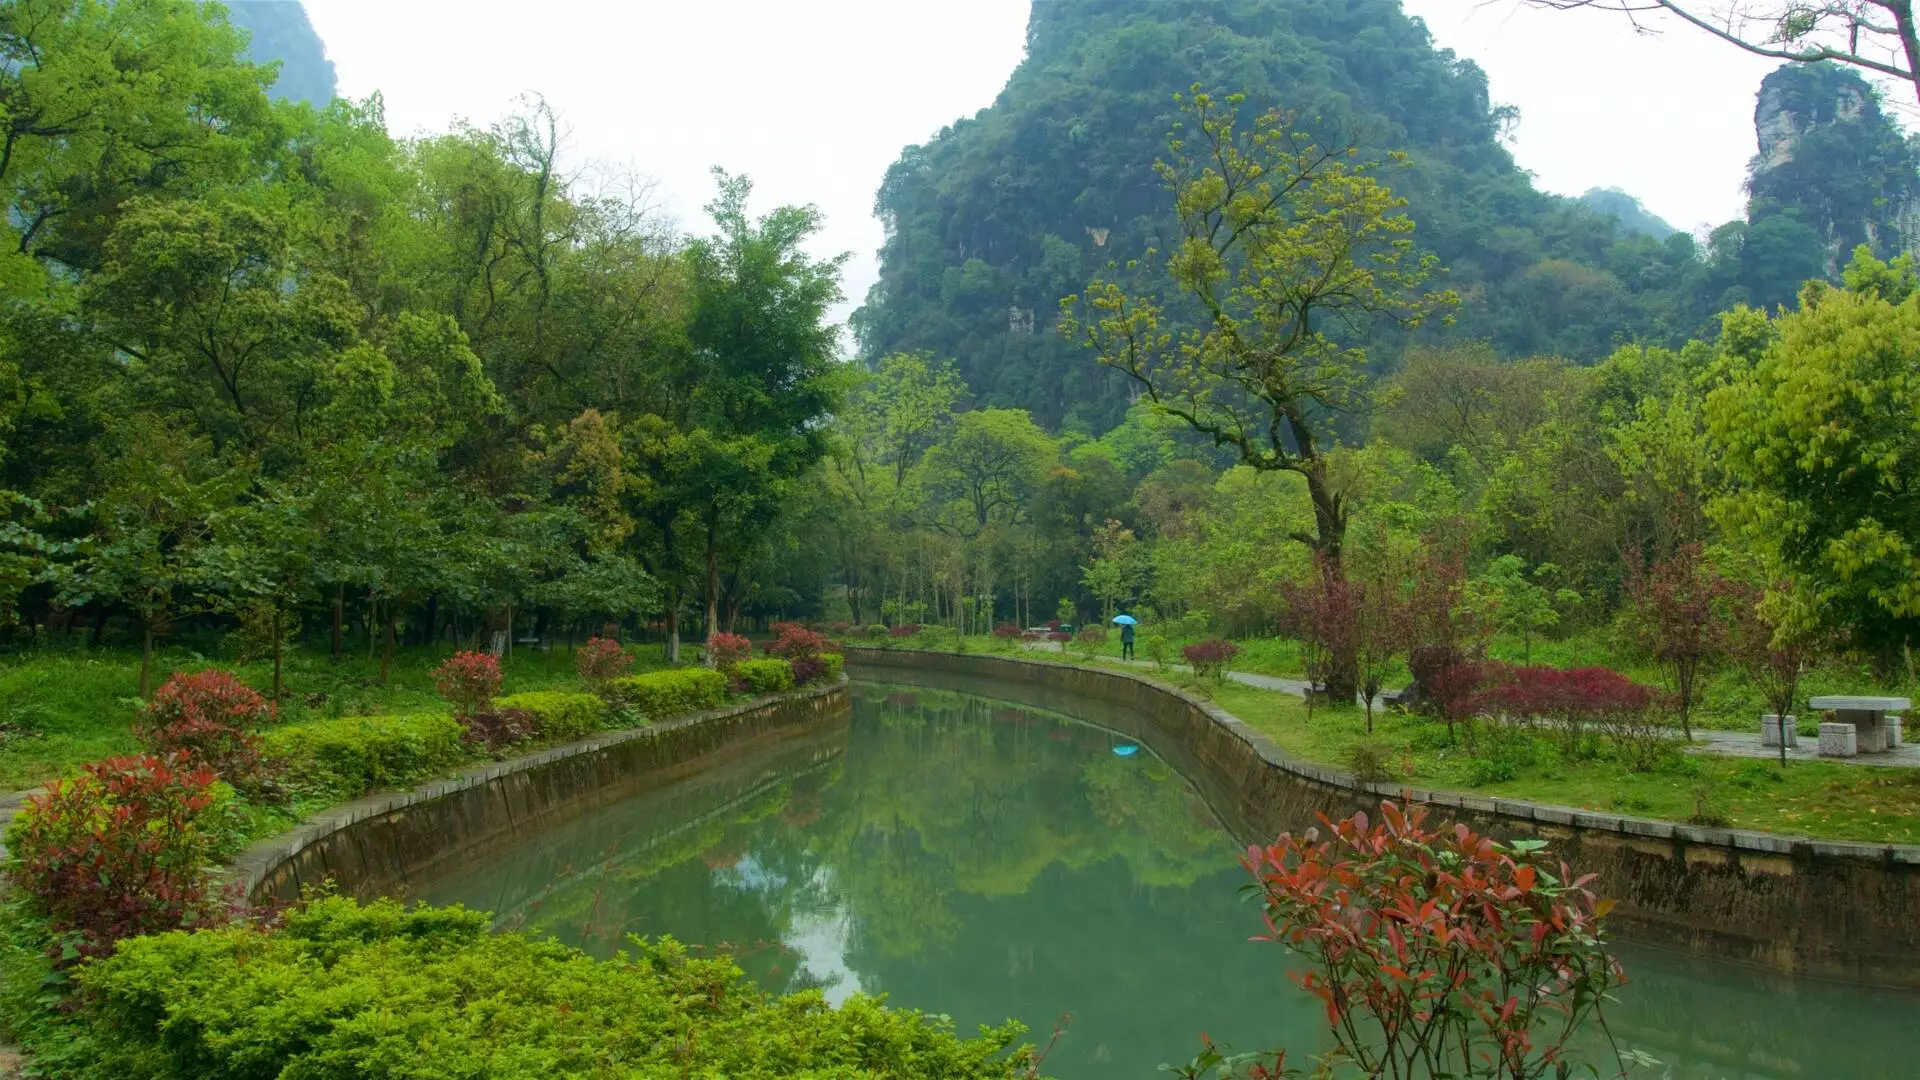 Yangshuo Park On Guilin In China